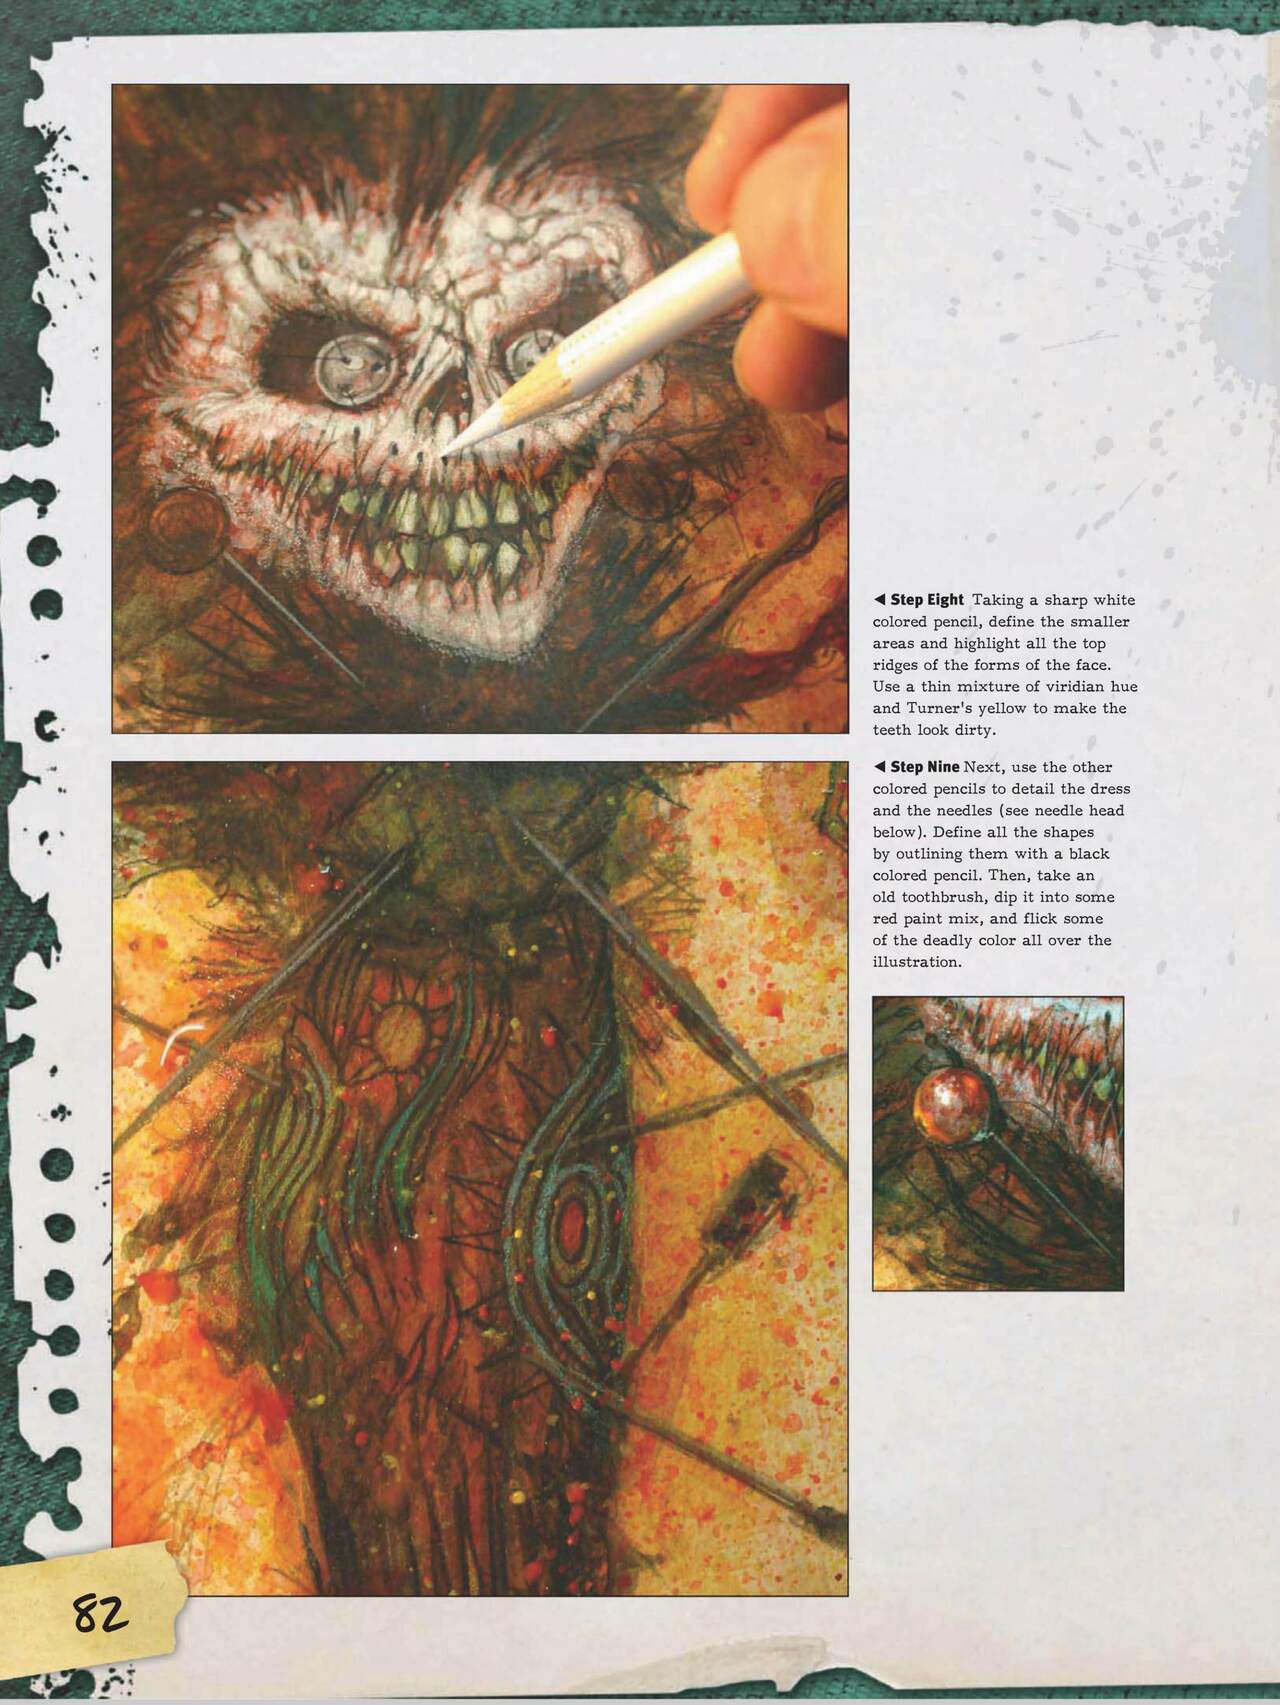 How to Draw Zombies: Discover the secrets to drawing, painting, and illustrating the undead 僵尸描绘集 83